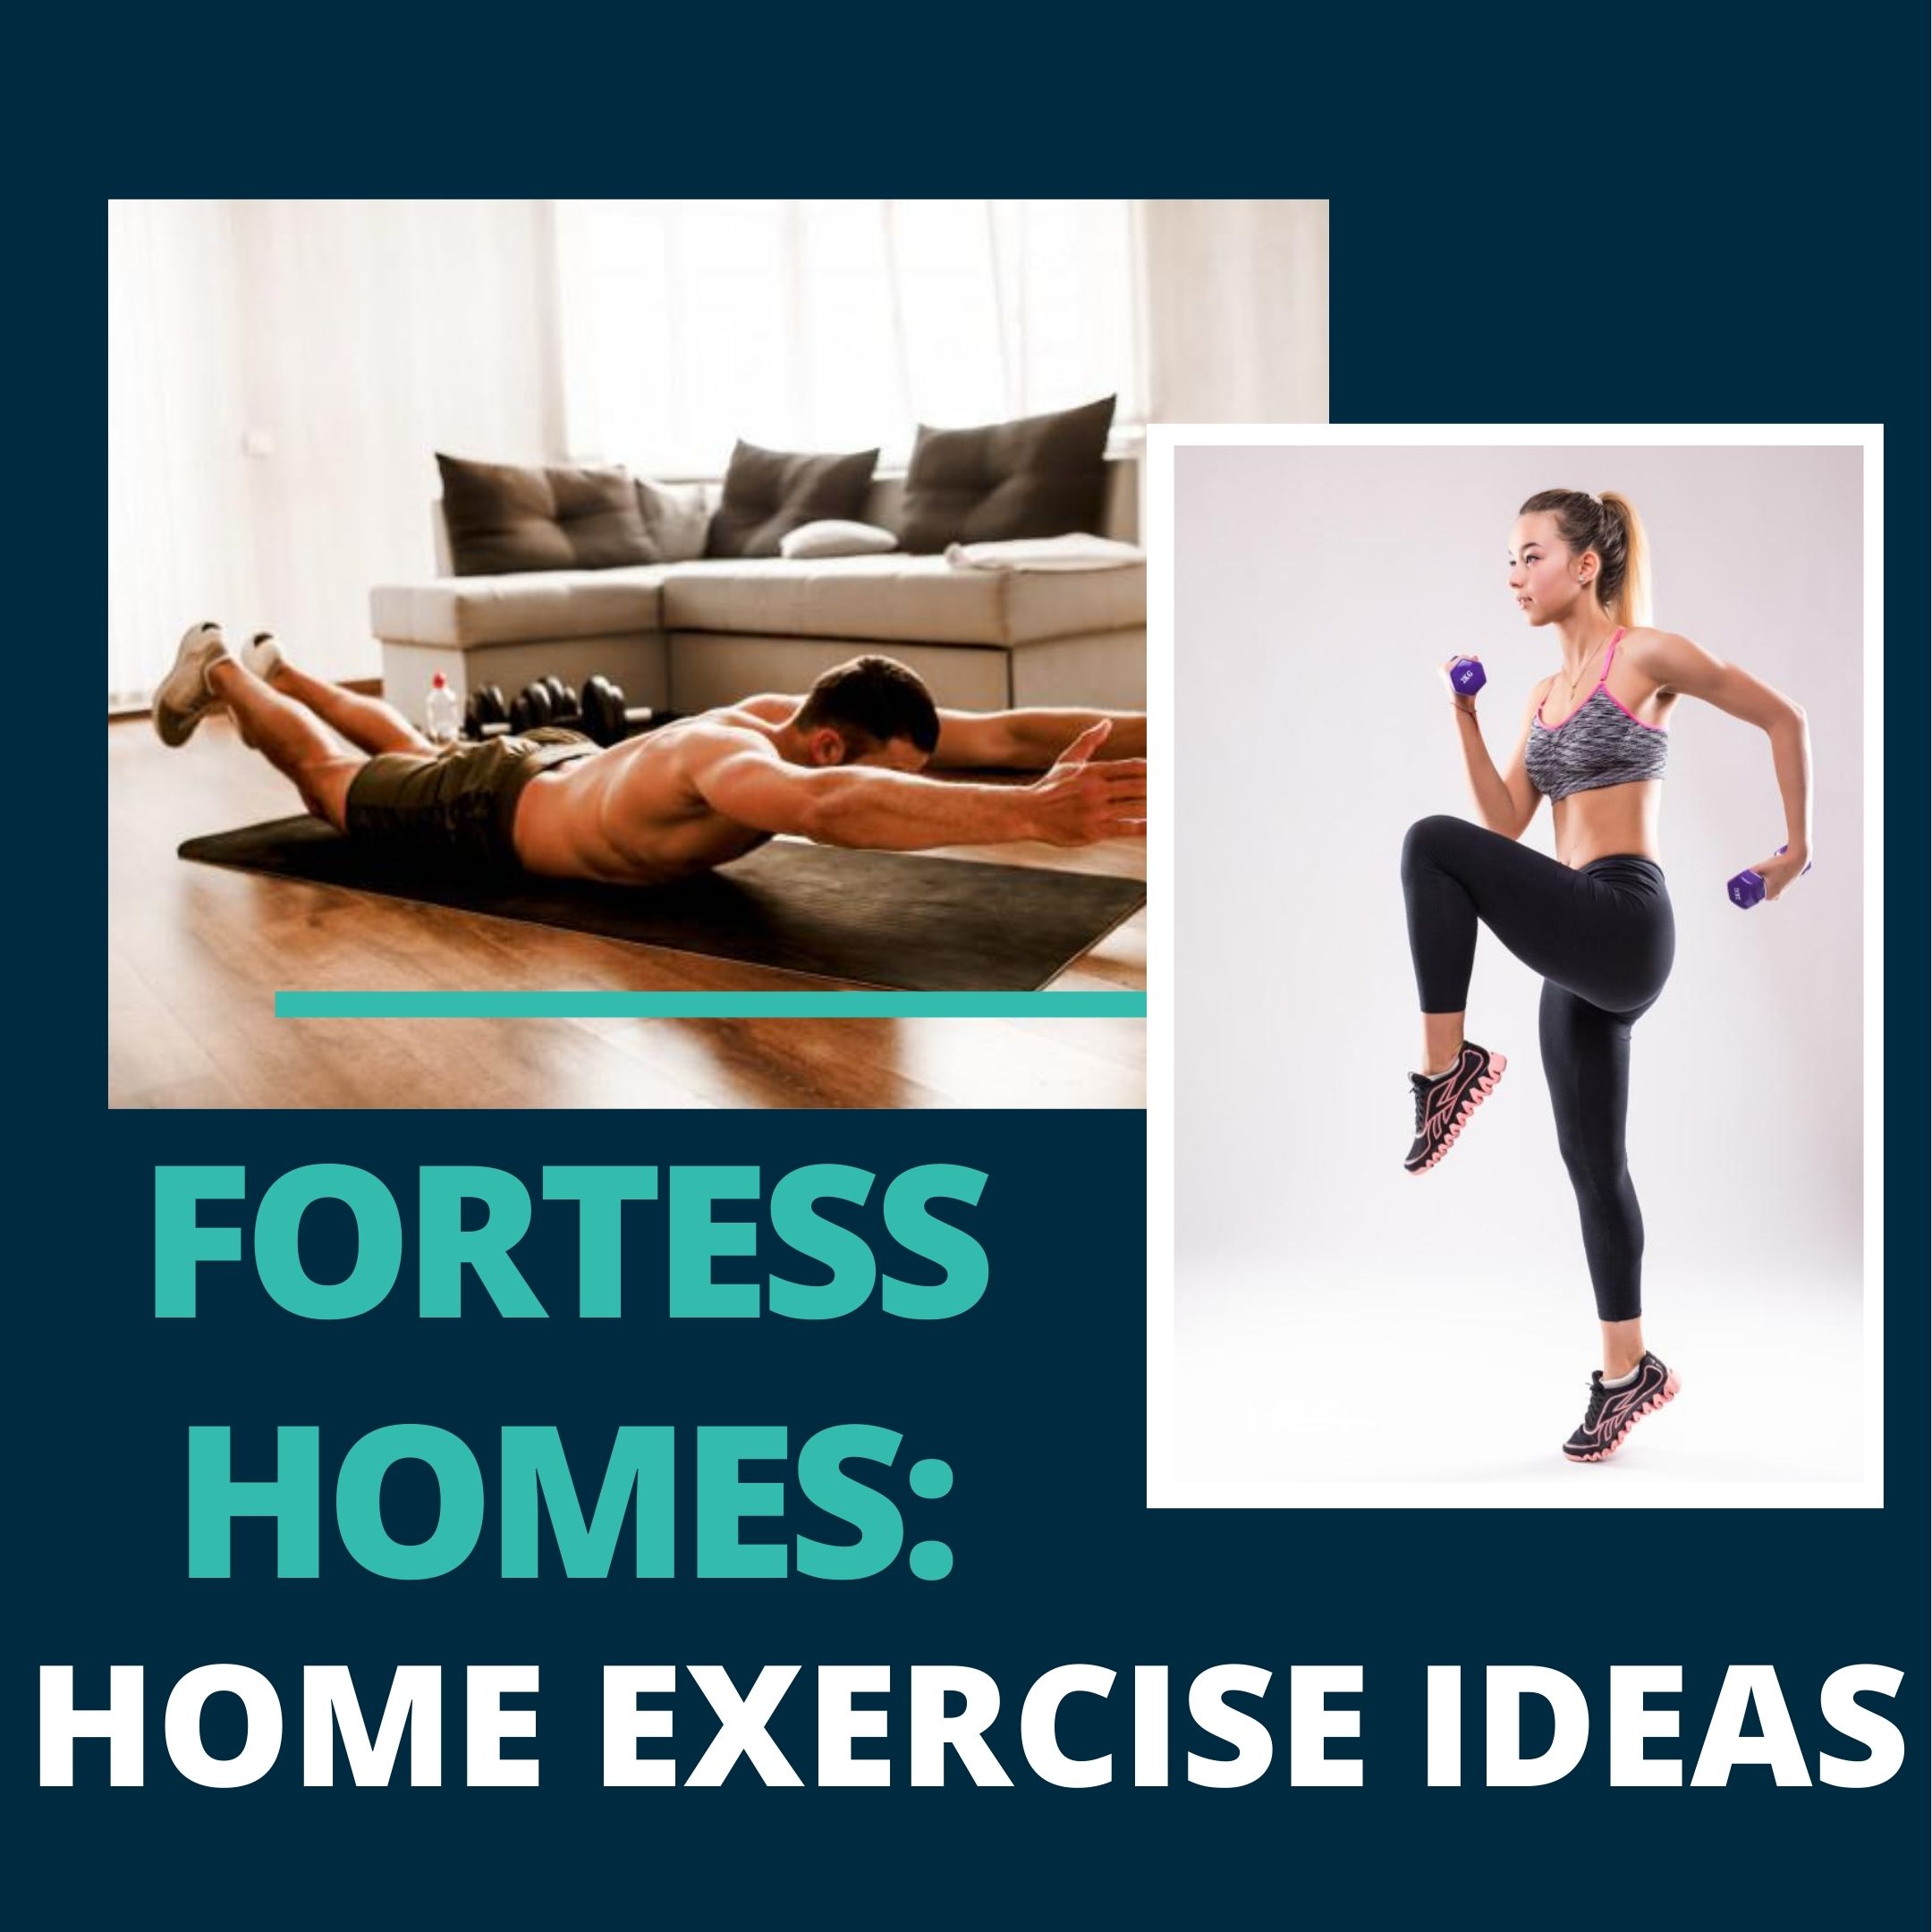 FORTESS HOMES: HOME EXERCISE IDEAS